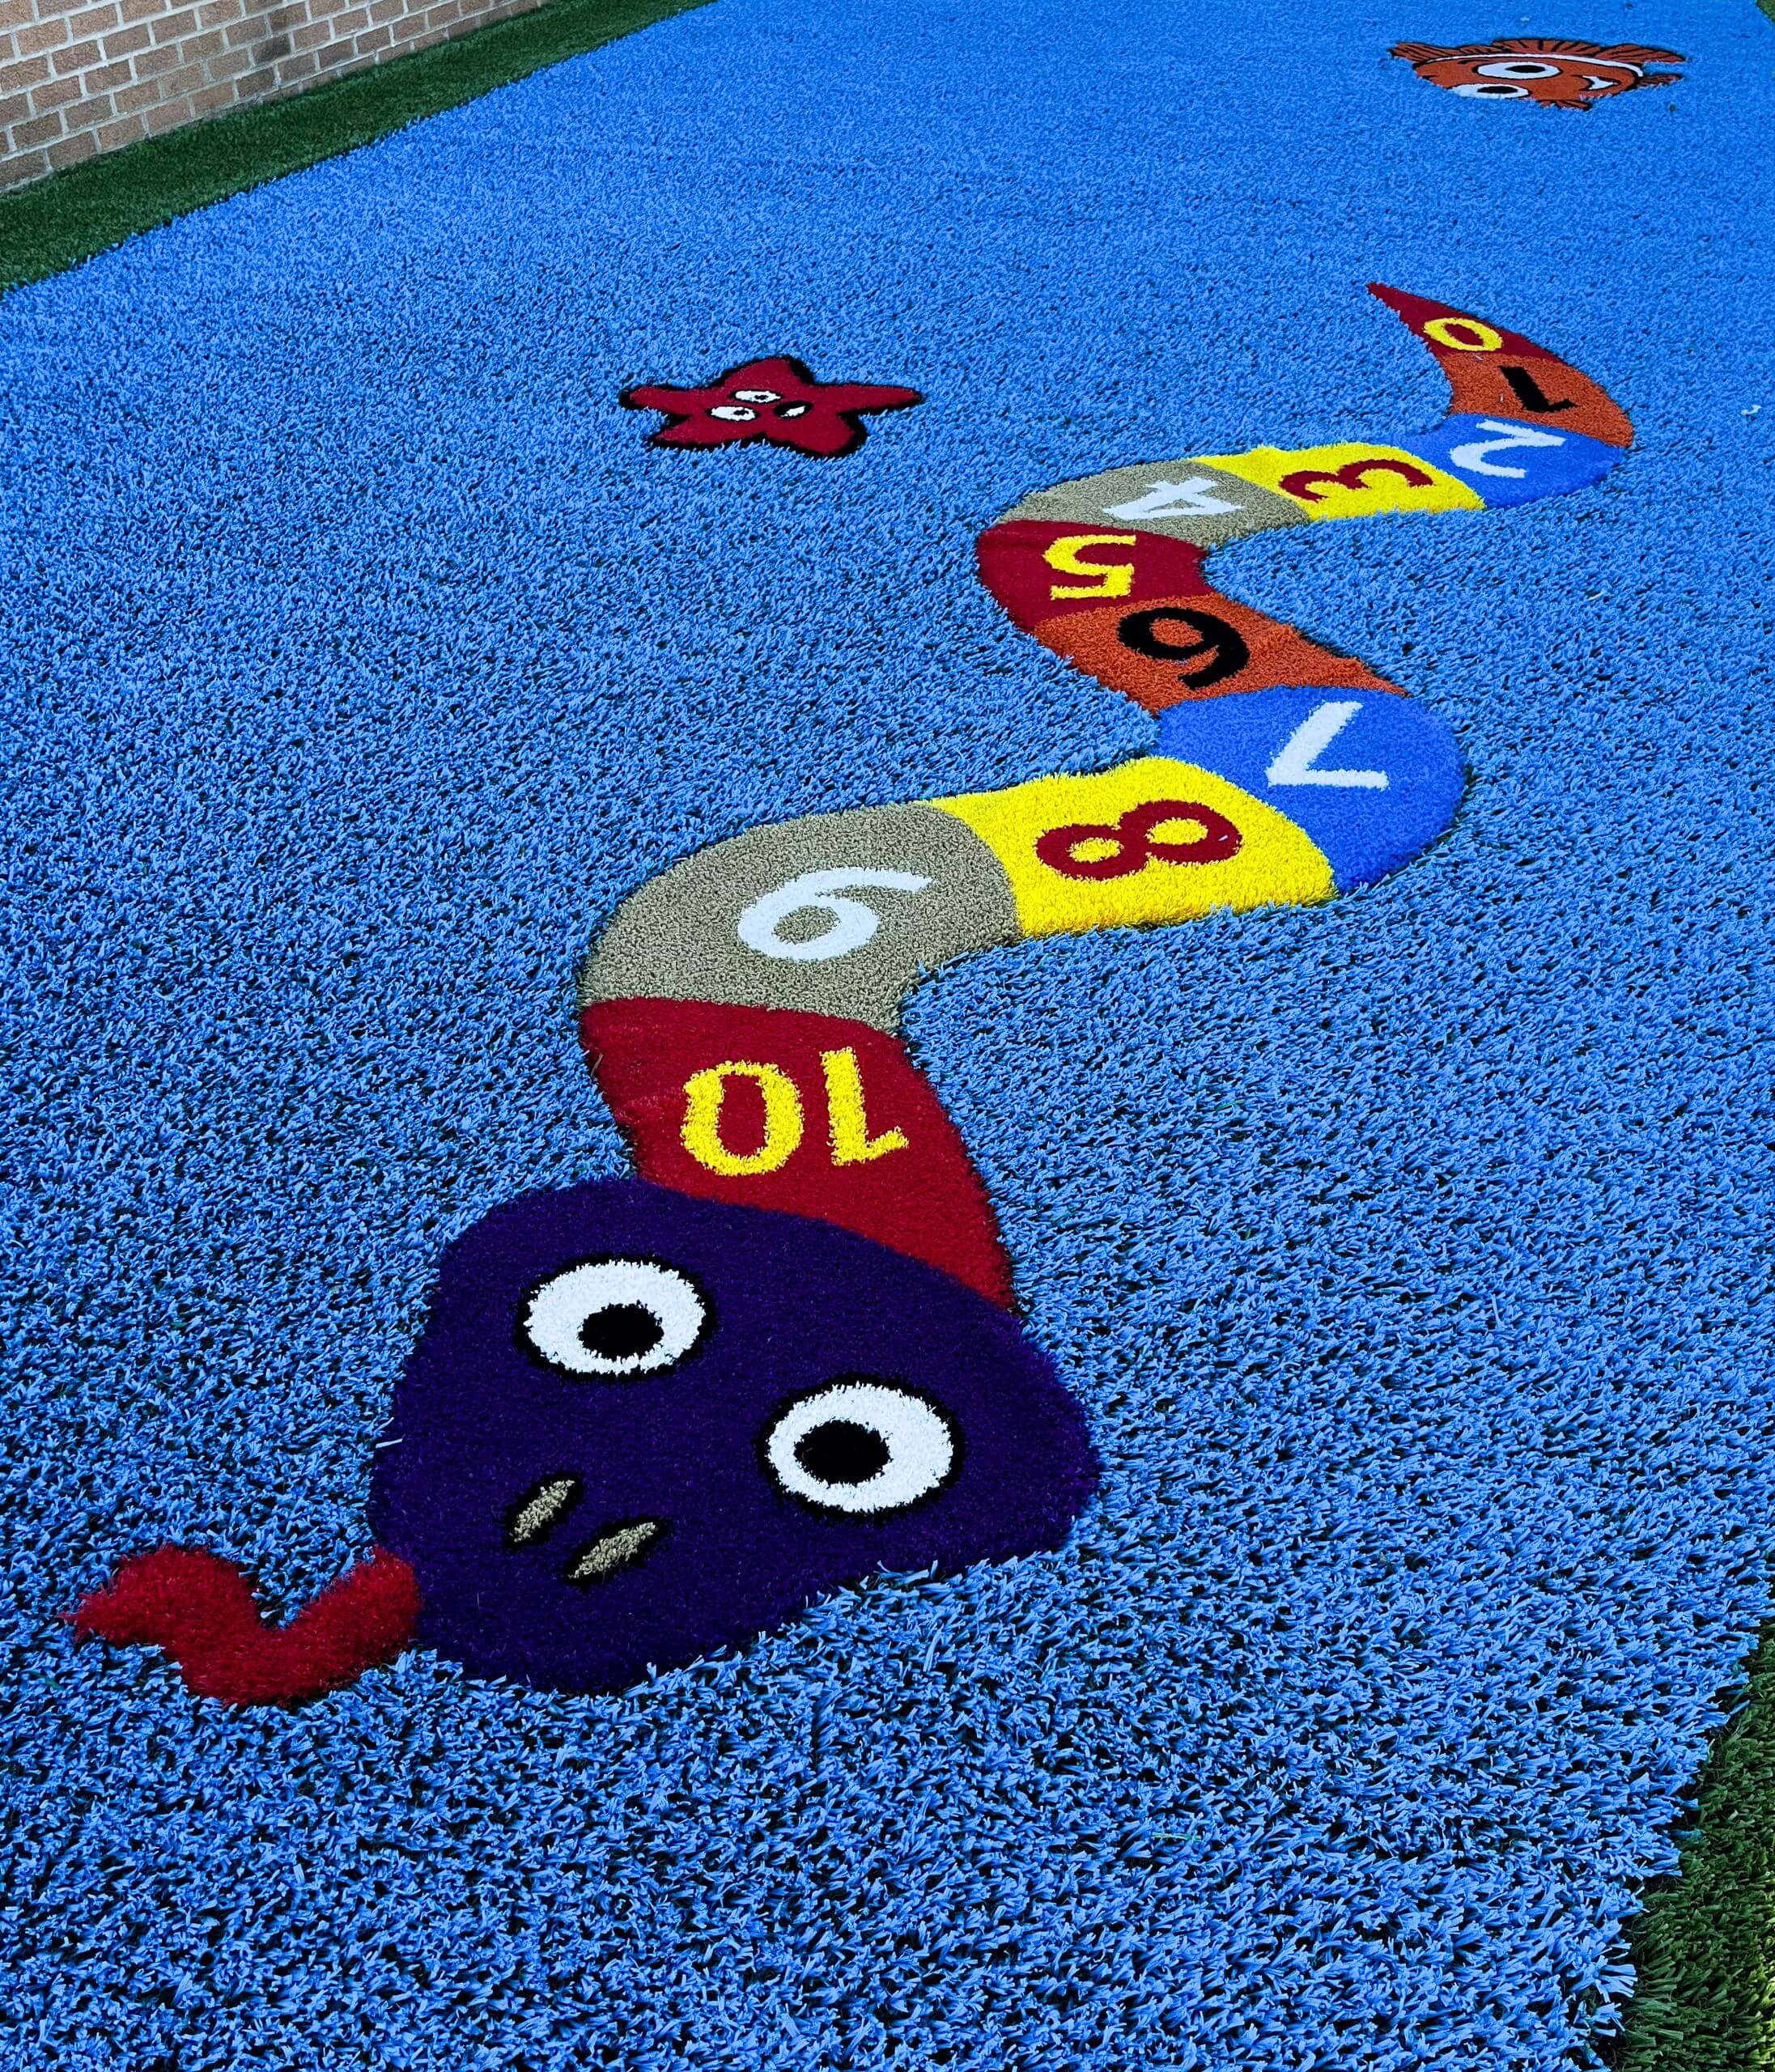 Colorful snake-like 'Funsert' design on blue synthetic playground turf with playful numbers and characters.